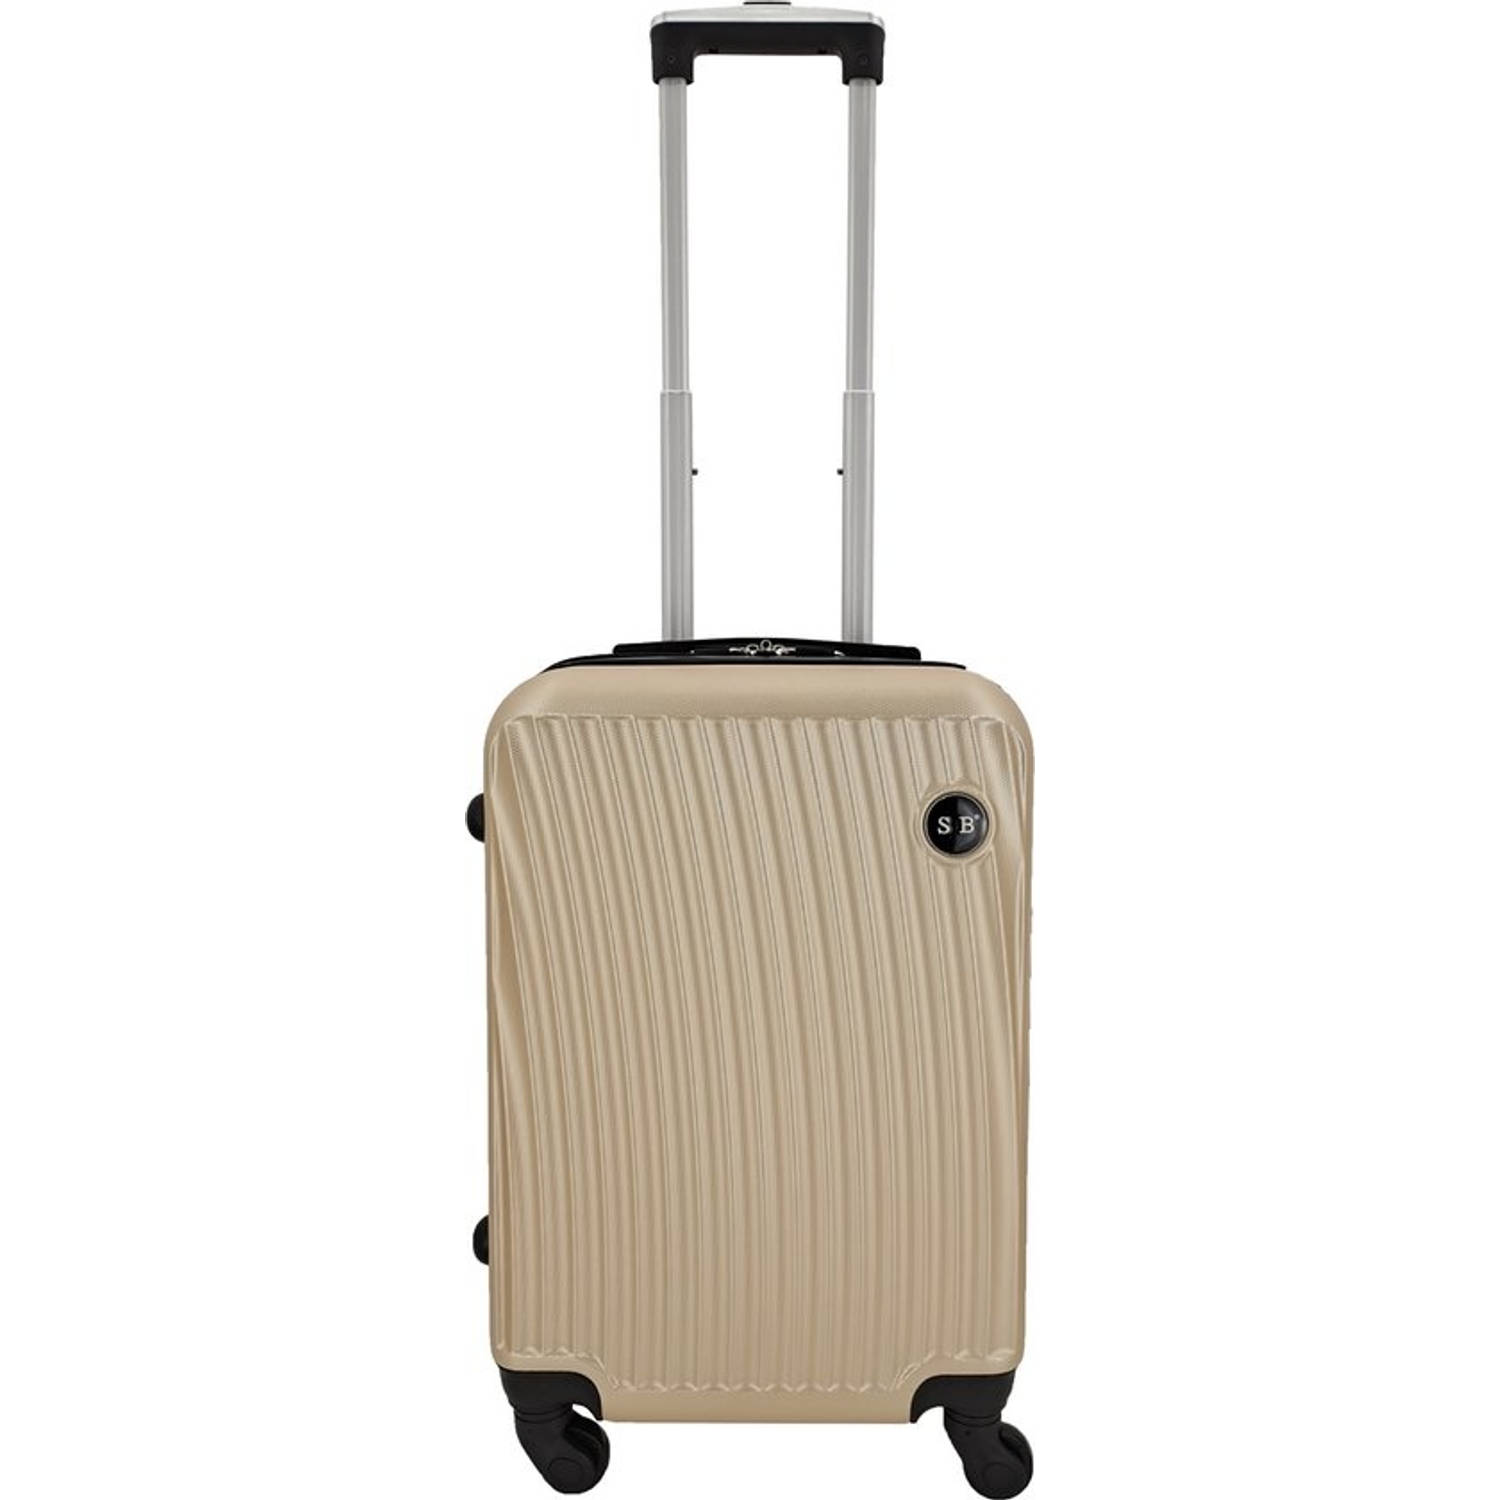 Sb Travelbags Small Koffer Voor Handbagage - Champagne